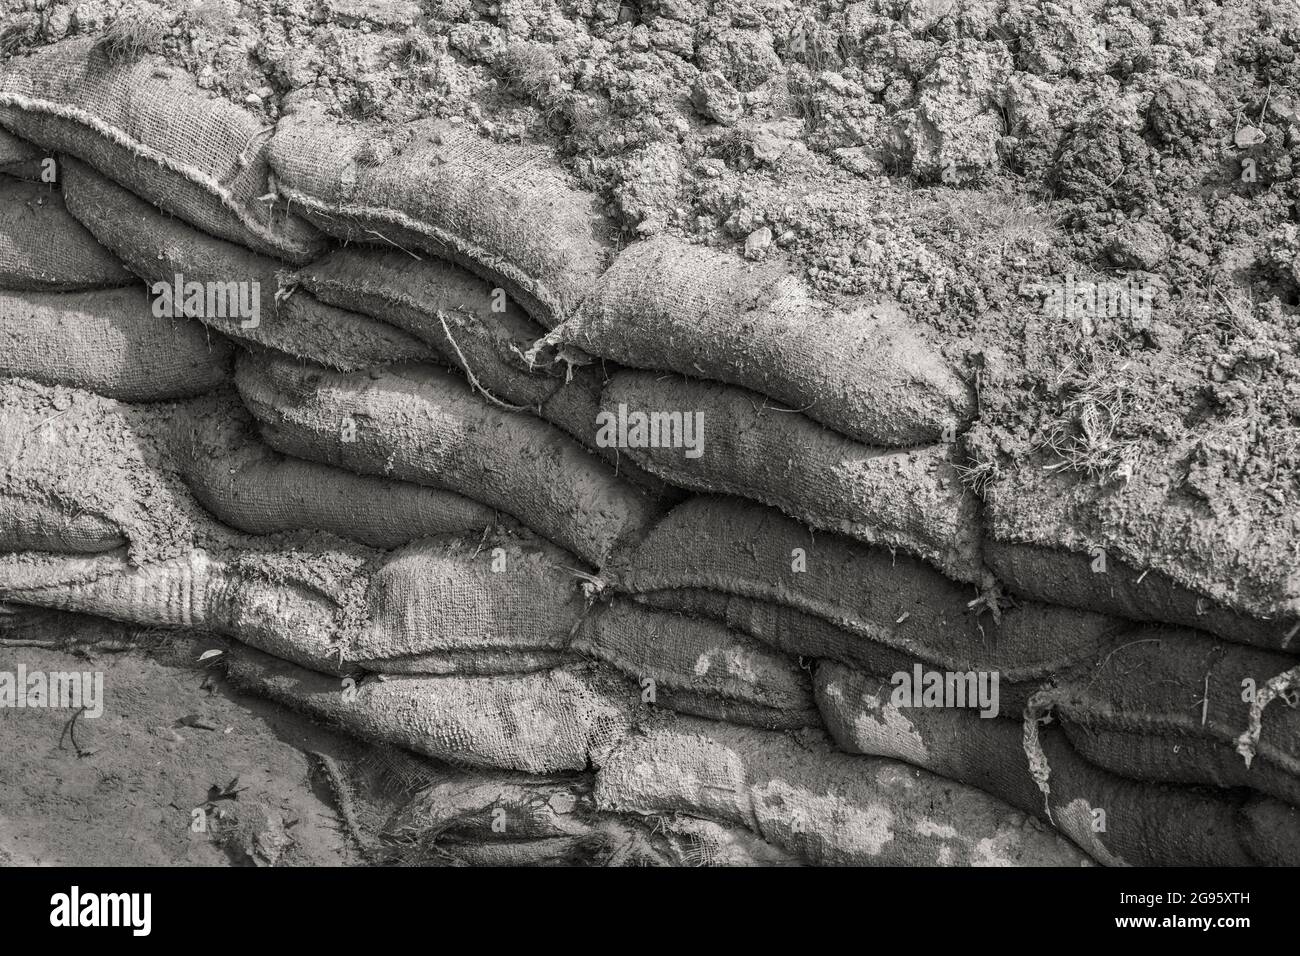 Stacked jute hessian sandbags covered by thick layer of topsoil & some flood water. Part of water erosion control efforts but useful for WW1 trenches Stock Photo